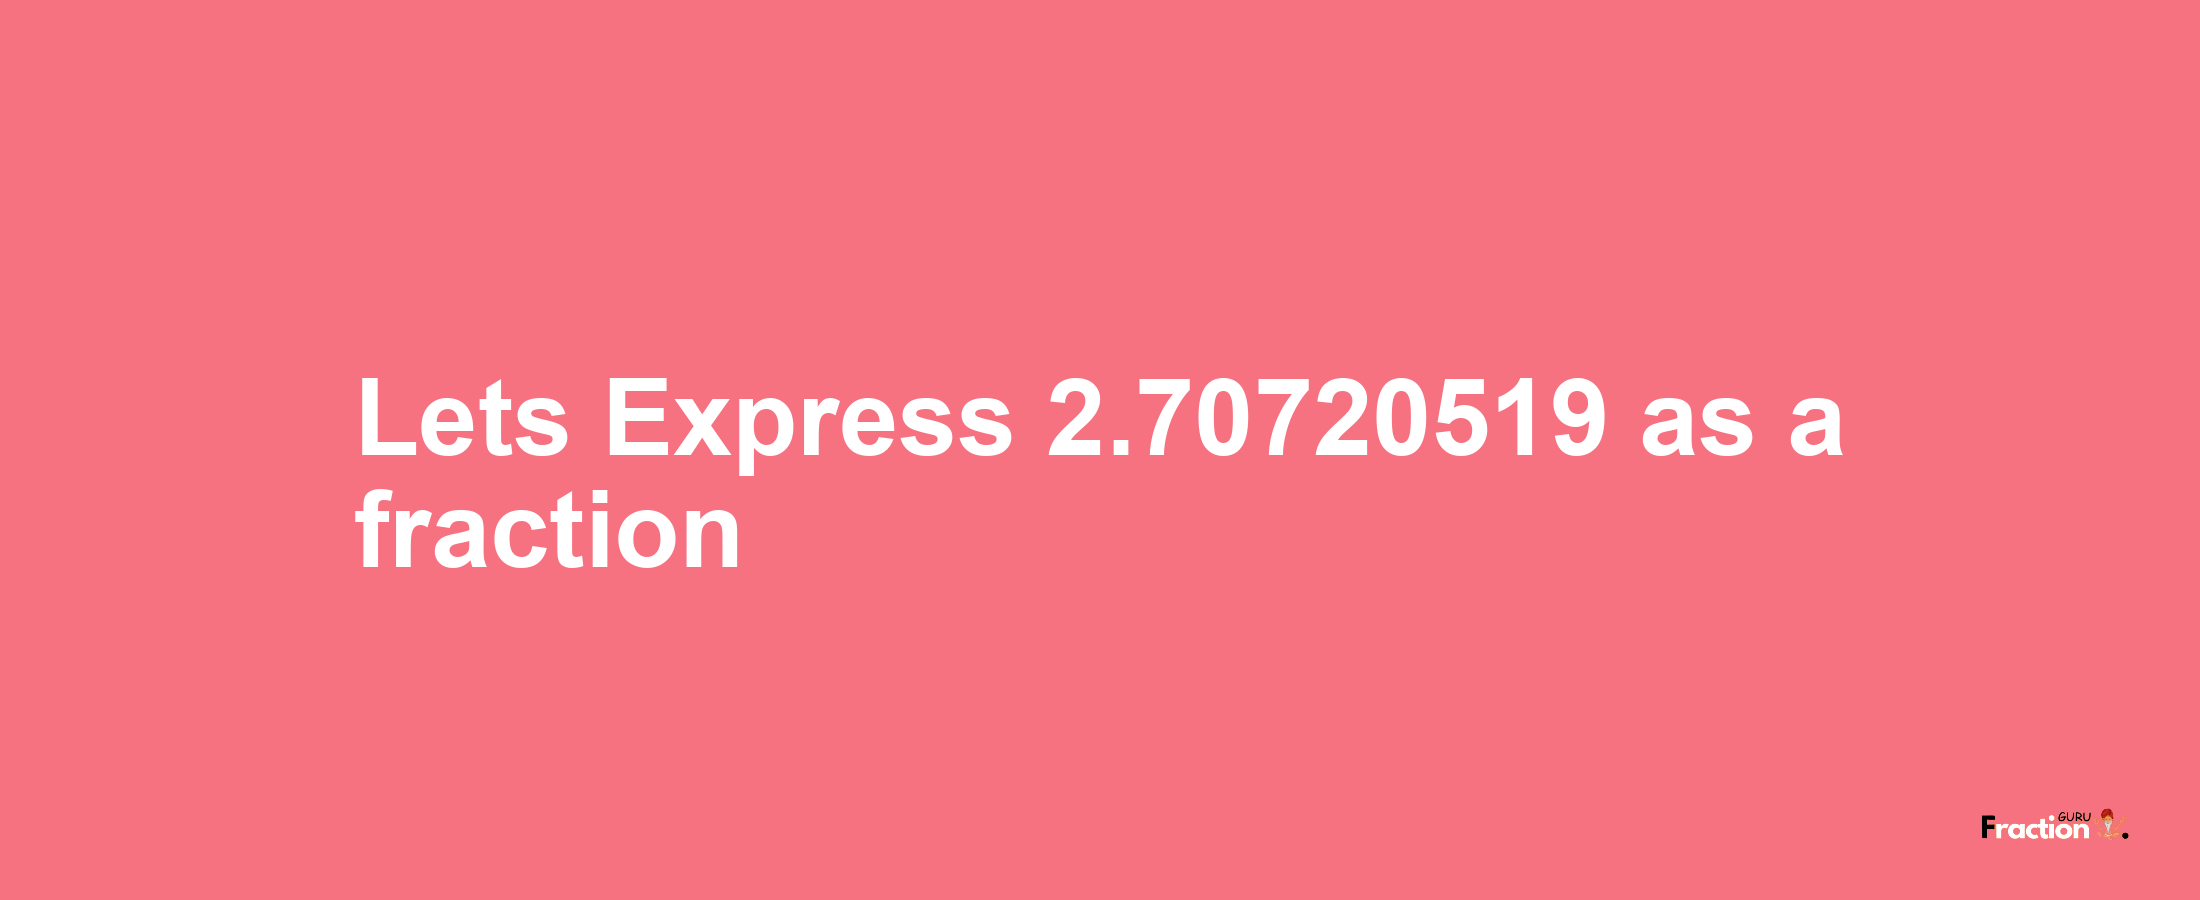 Lets Express 2.70720519 as afraction